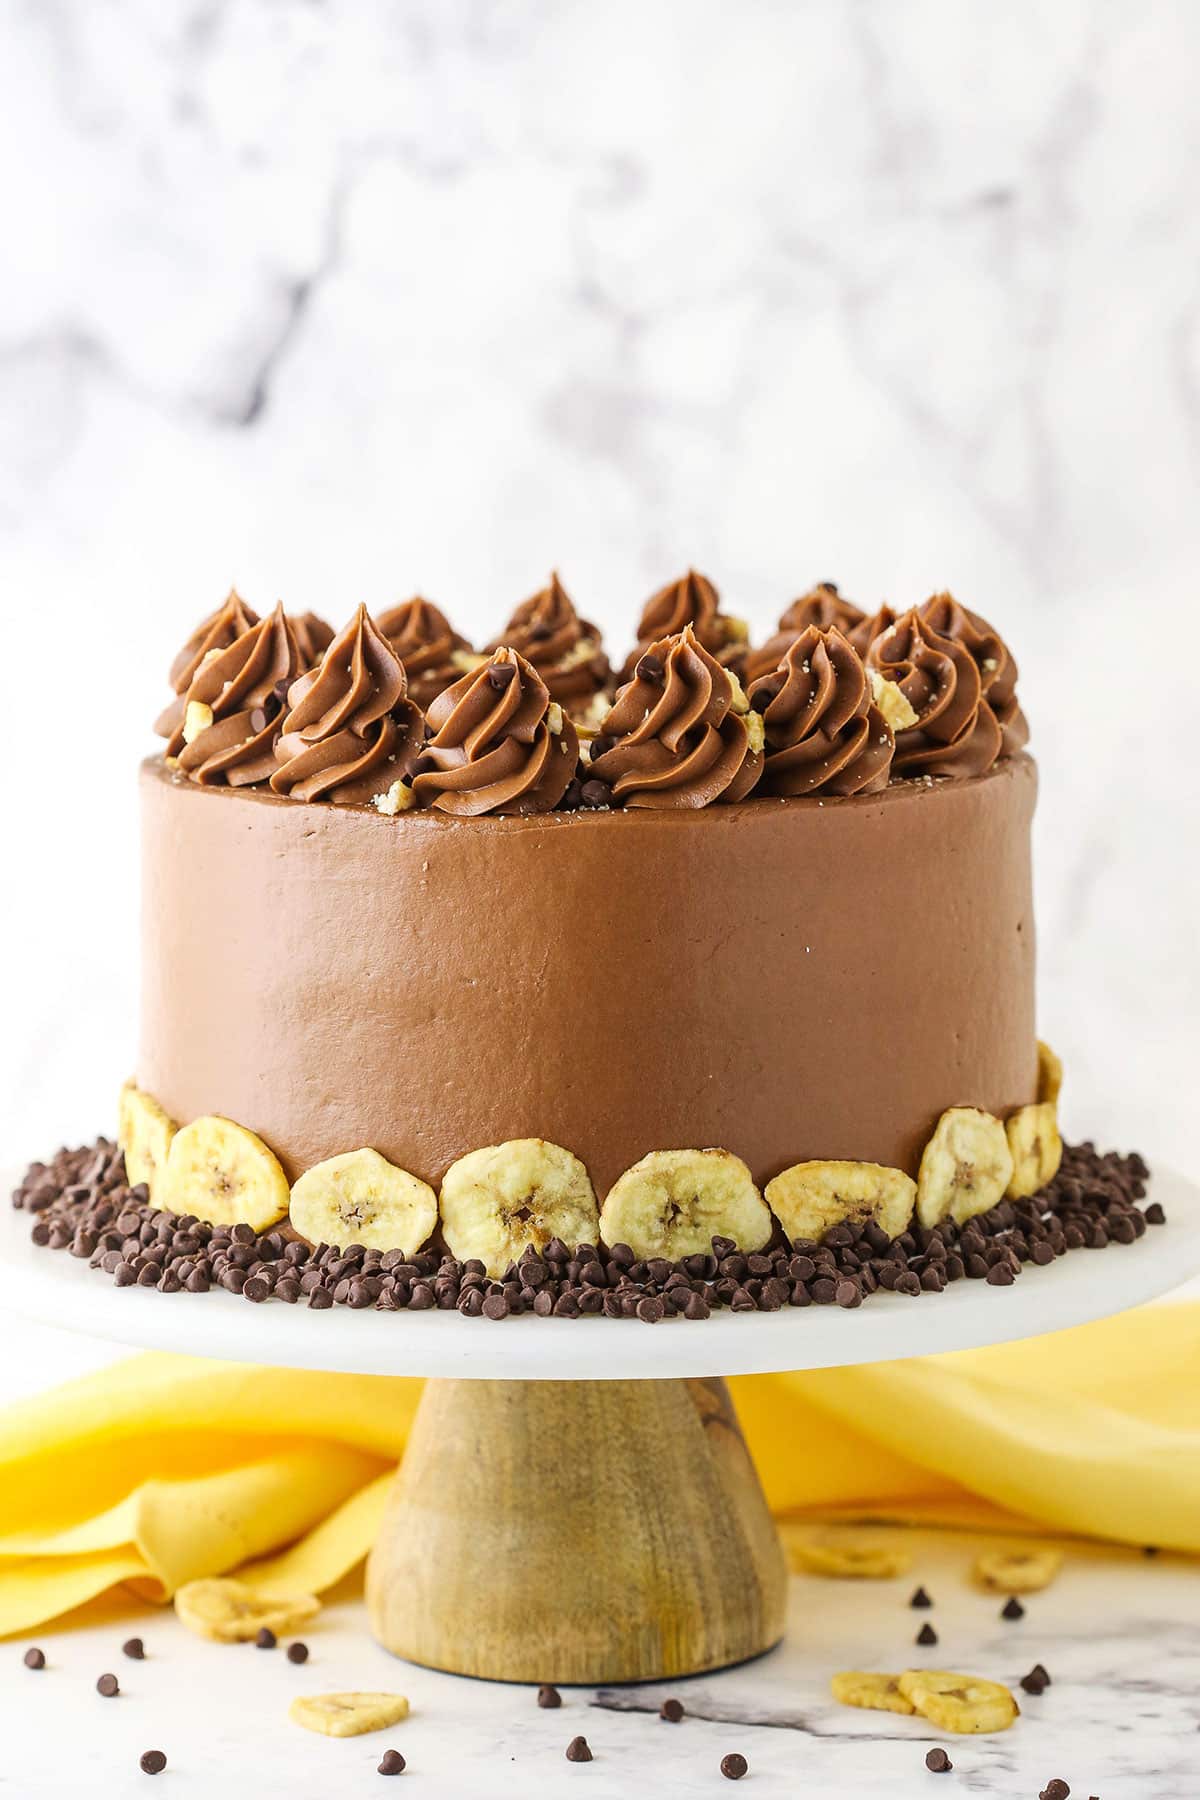 Side view of a full banana chocolate chip cake, topped with chocolate swirls, chocolate chips and banana chips on a wood and marble cake stand